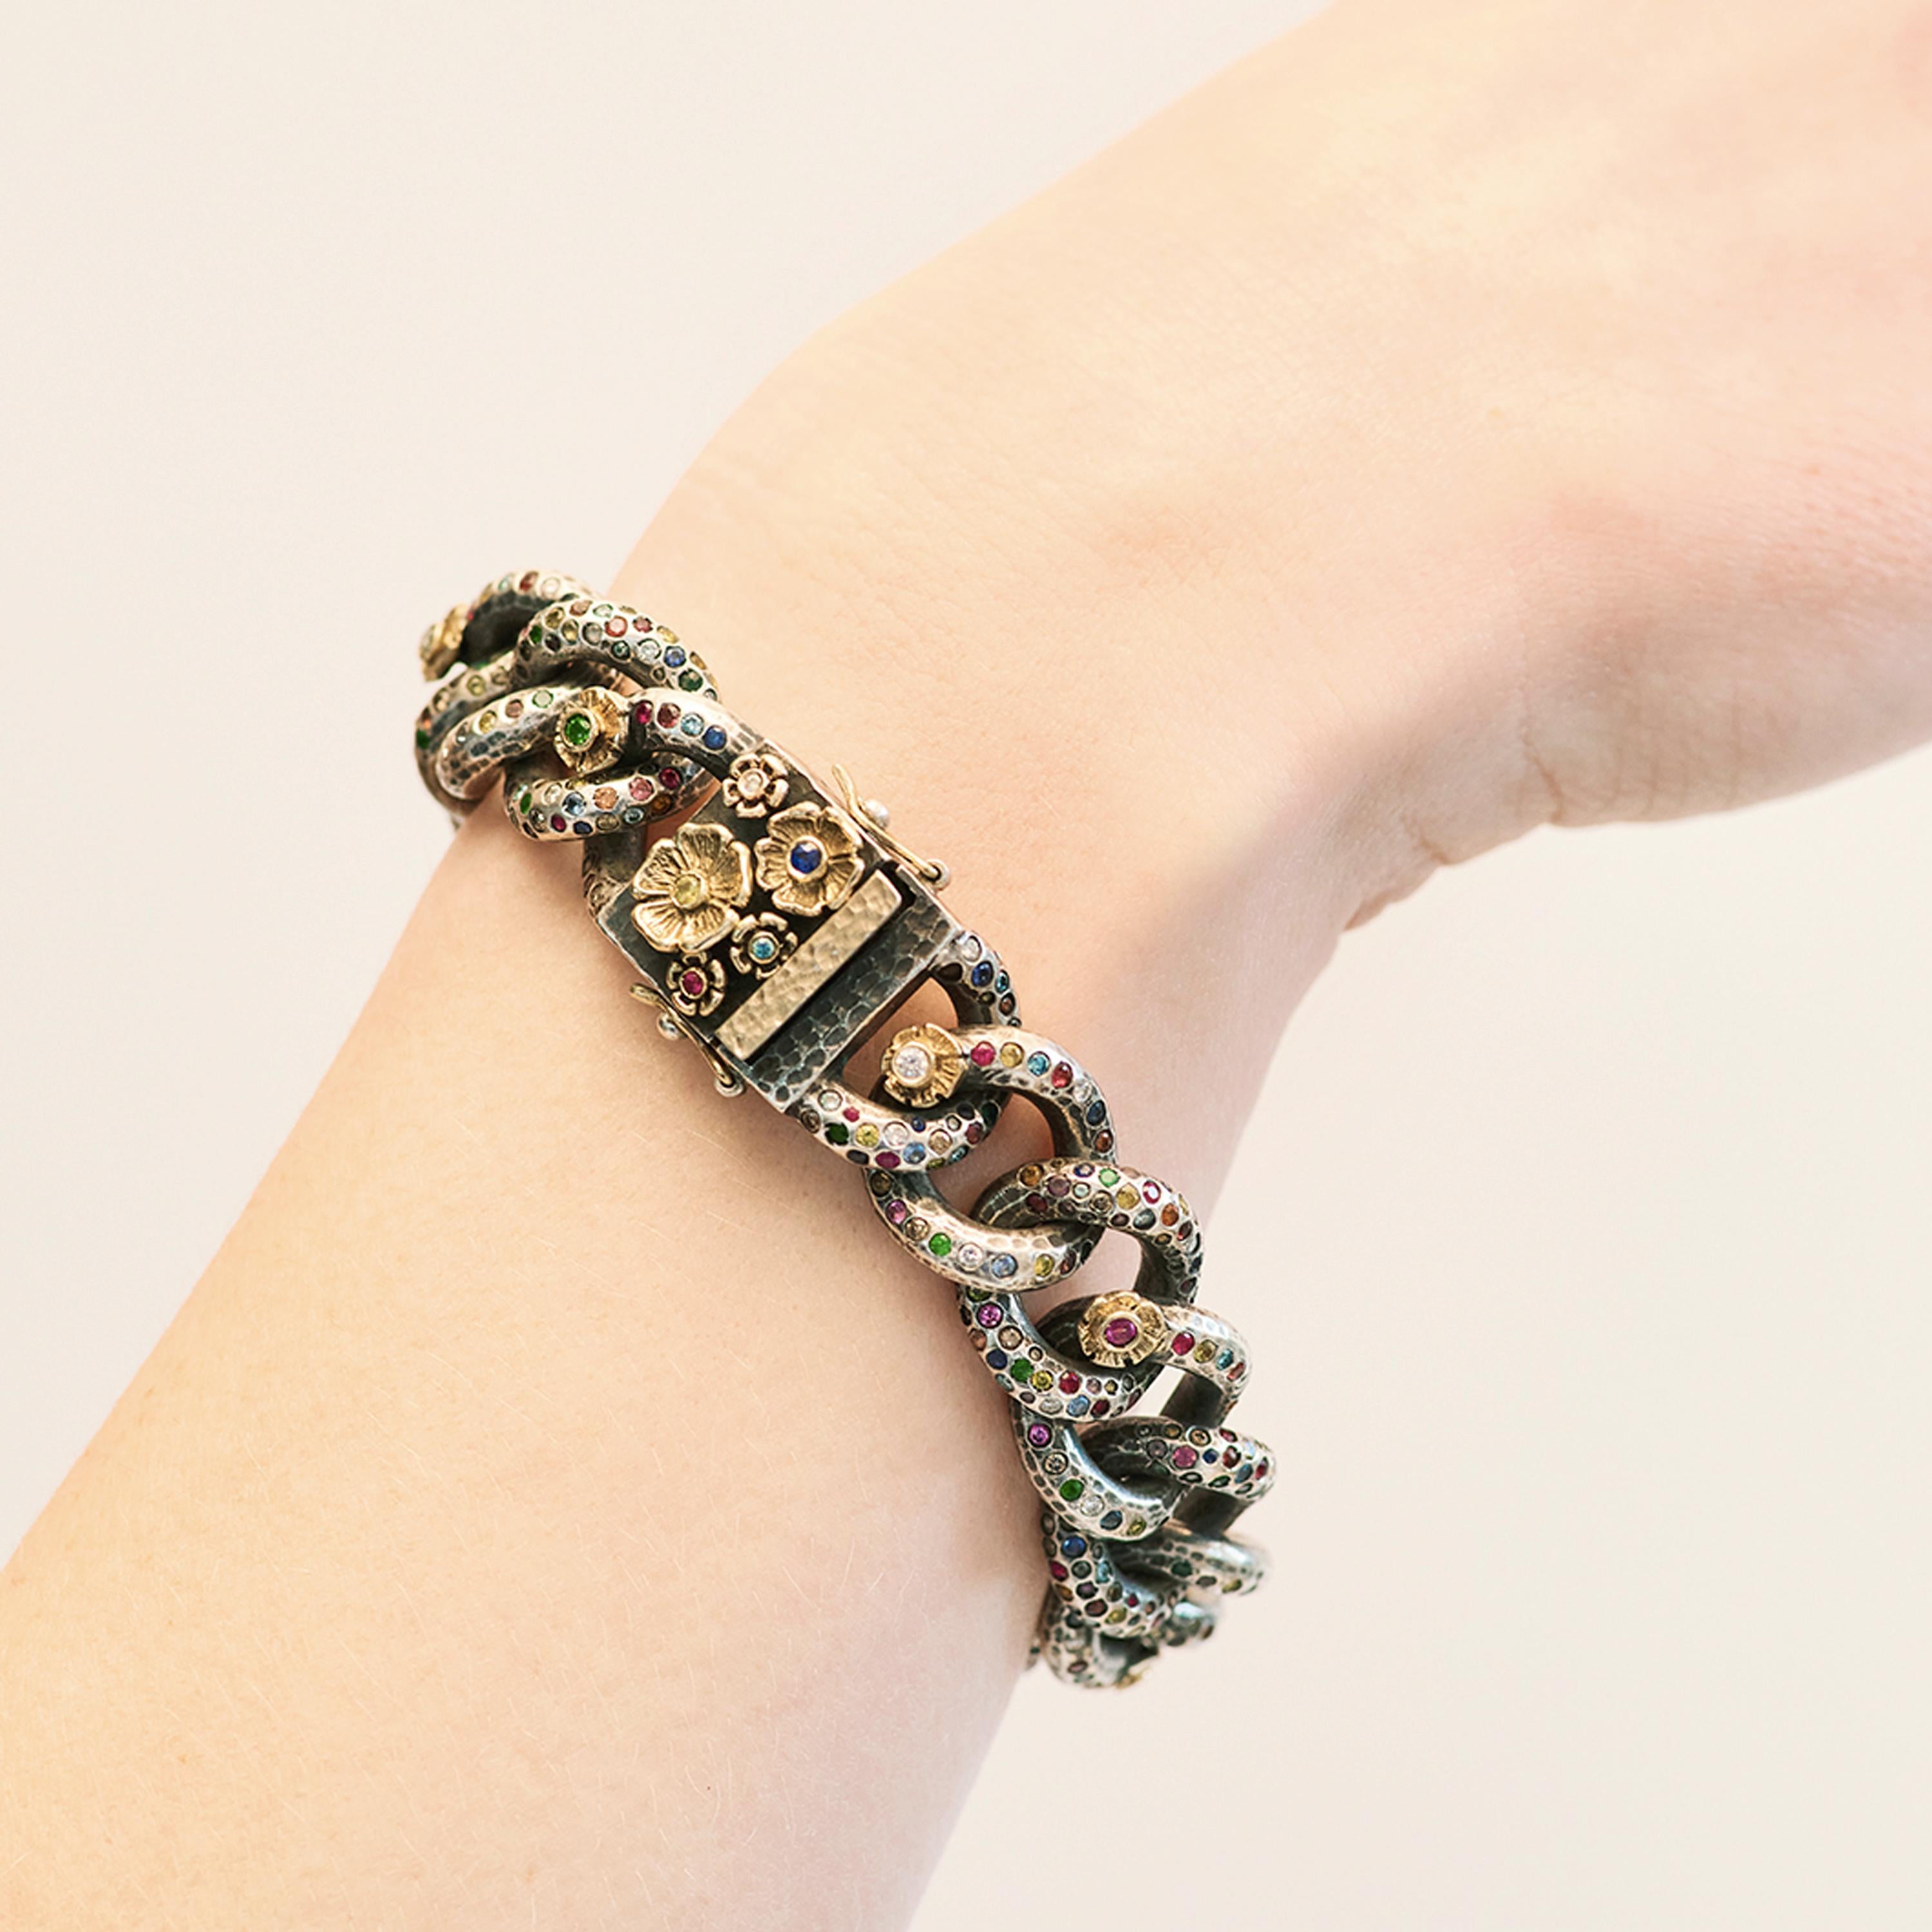 Stella Flame’s Ooak Tutti Frutti Link Bracelet is crafted from 14 karat gold, which has been oxidised. Its dark chain links are scattered with over 600 colour diamonds: white, champagne, blue, yellow and grey diamonds are set amongst pink, yellow,